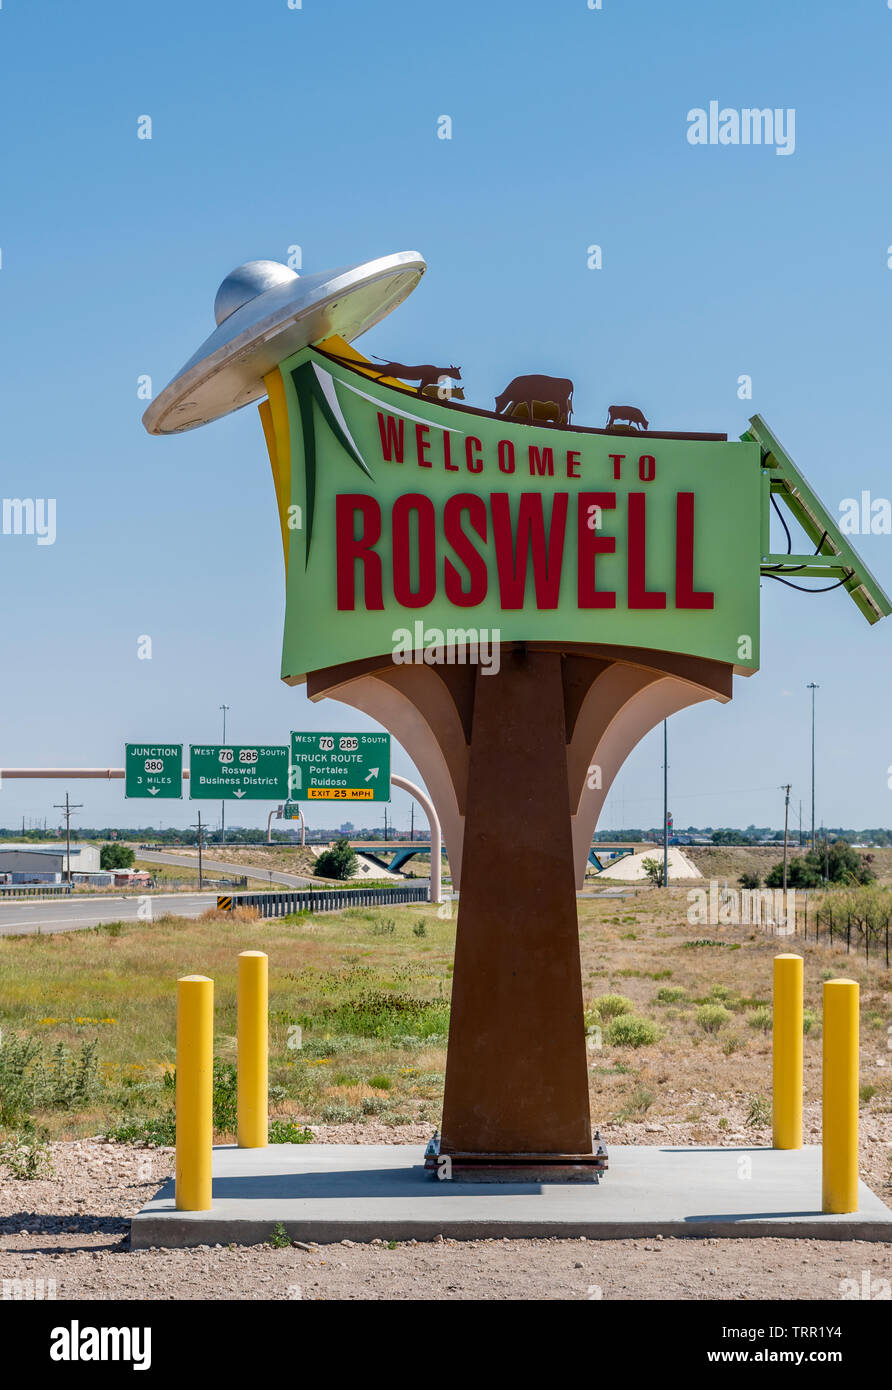 Roswell UFO Welcome sign at the city limits on Highway 285, Roswell, New Mexico, USA. Stock Photo